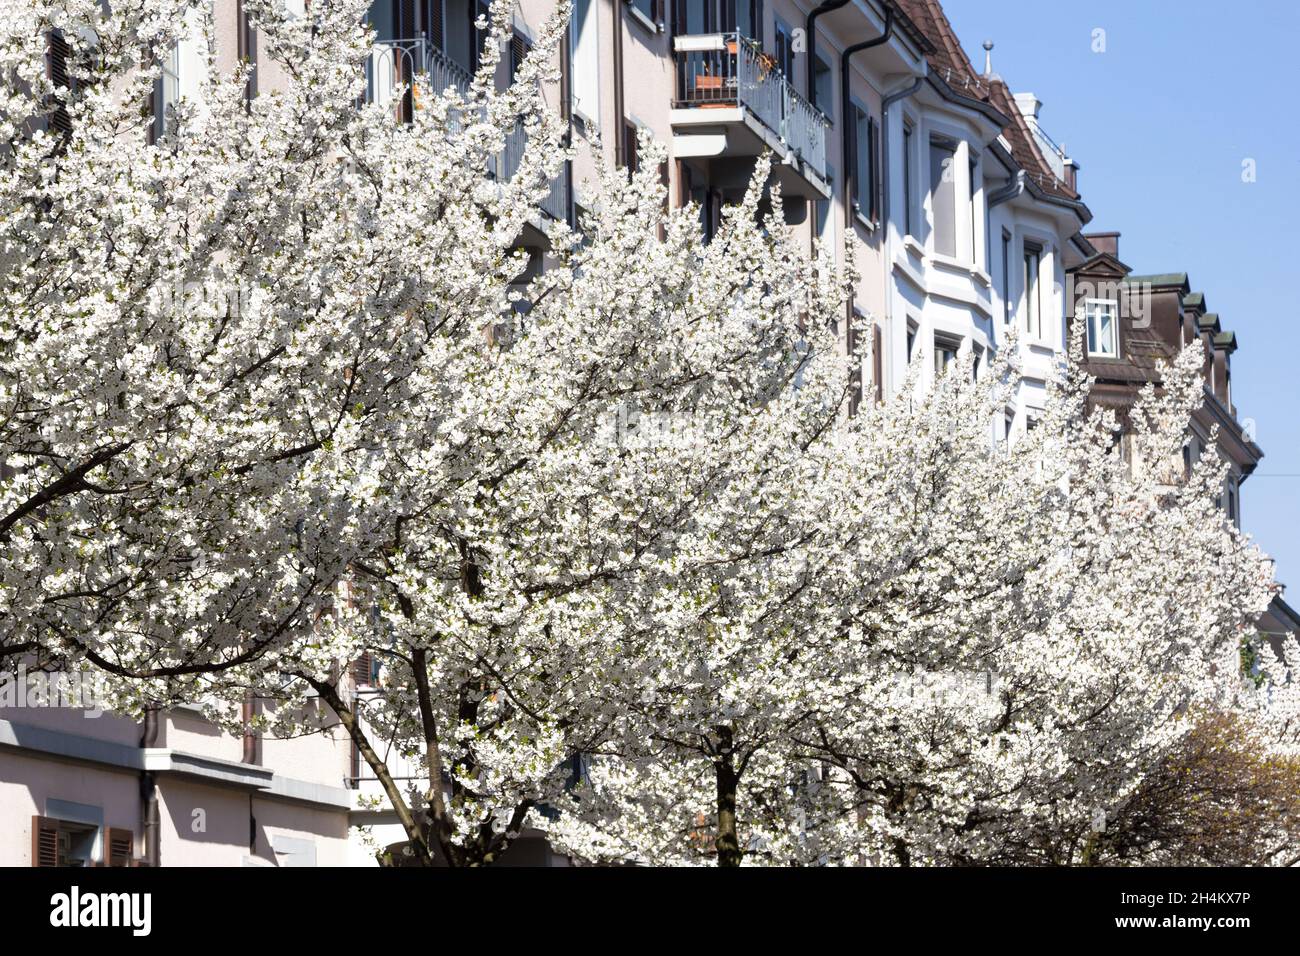 Blooming white cherry trees along the street in an urban area - friendly living environment and life quality Stock Photo